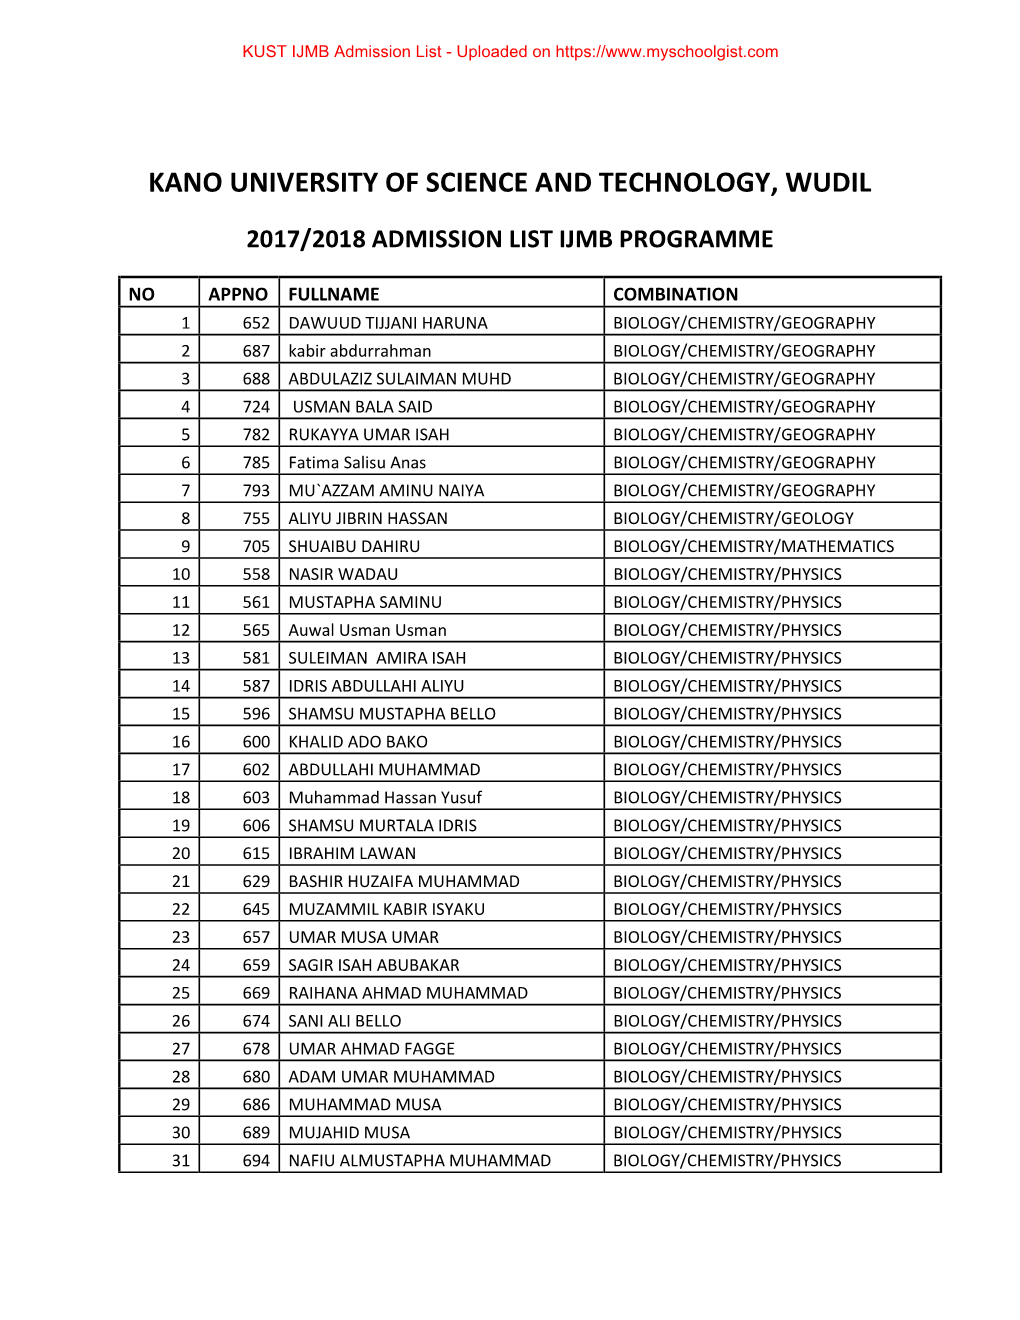 Kano University of Science and Technology, Wudil